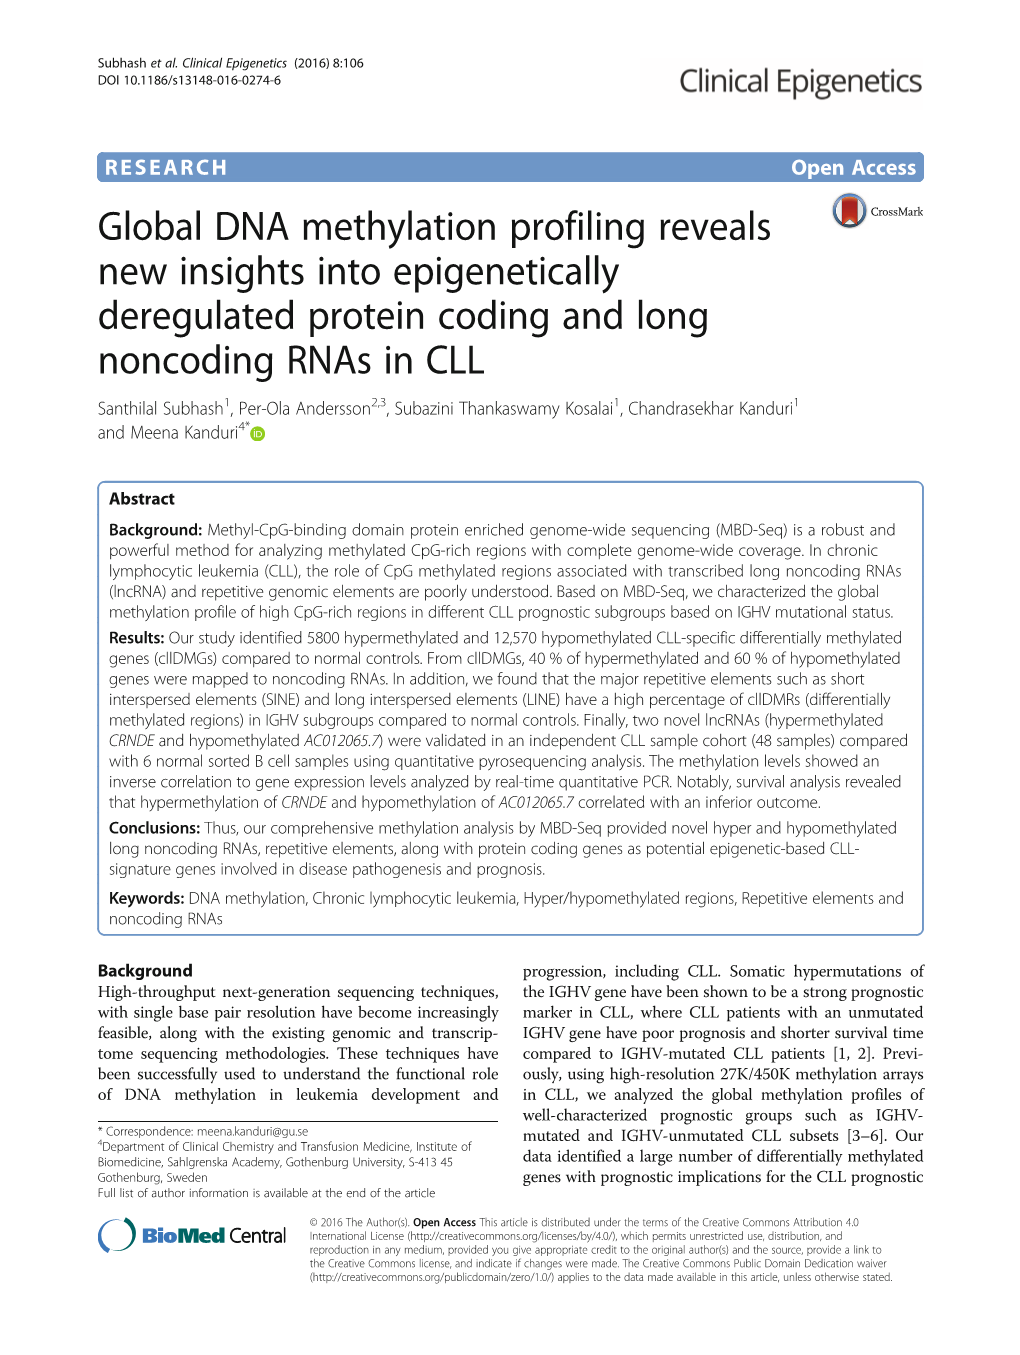 Global DNA Methylation Profiling Reveals New Insights Into